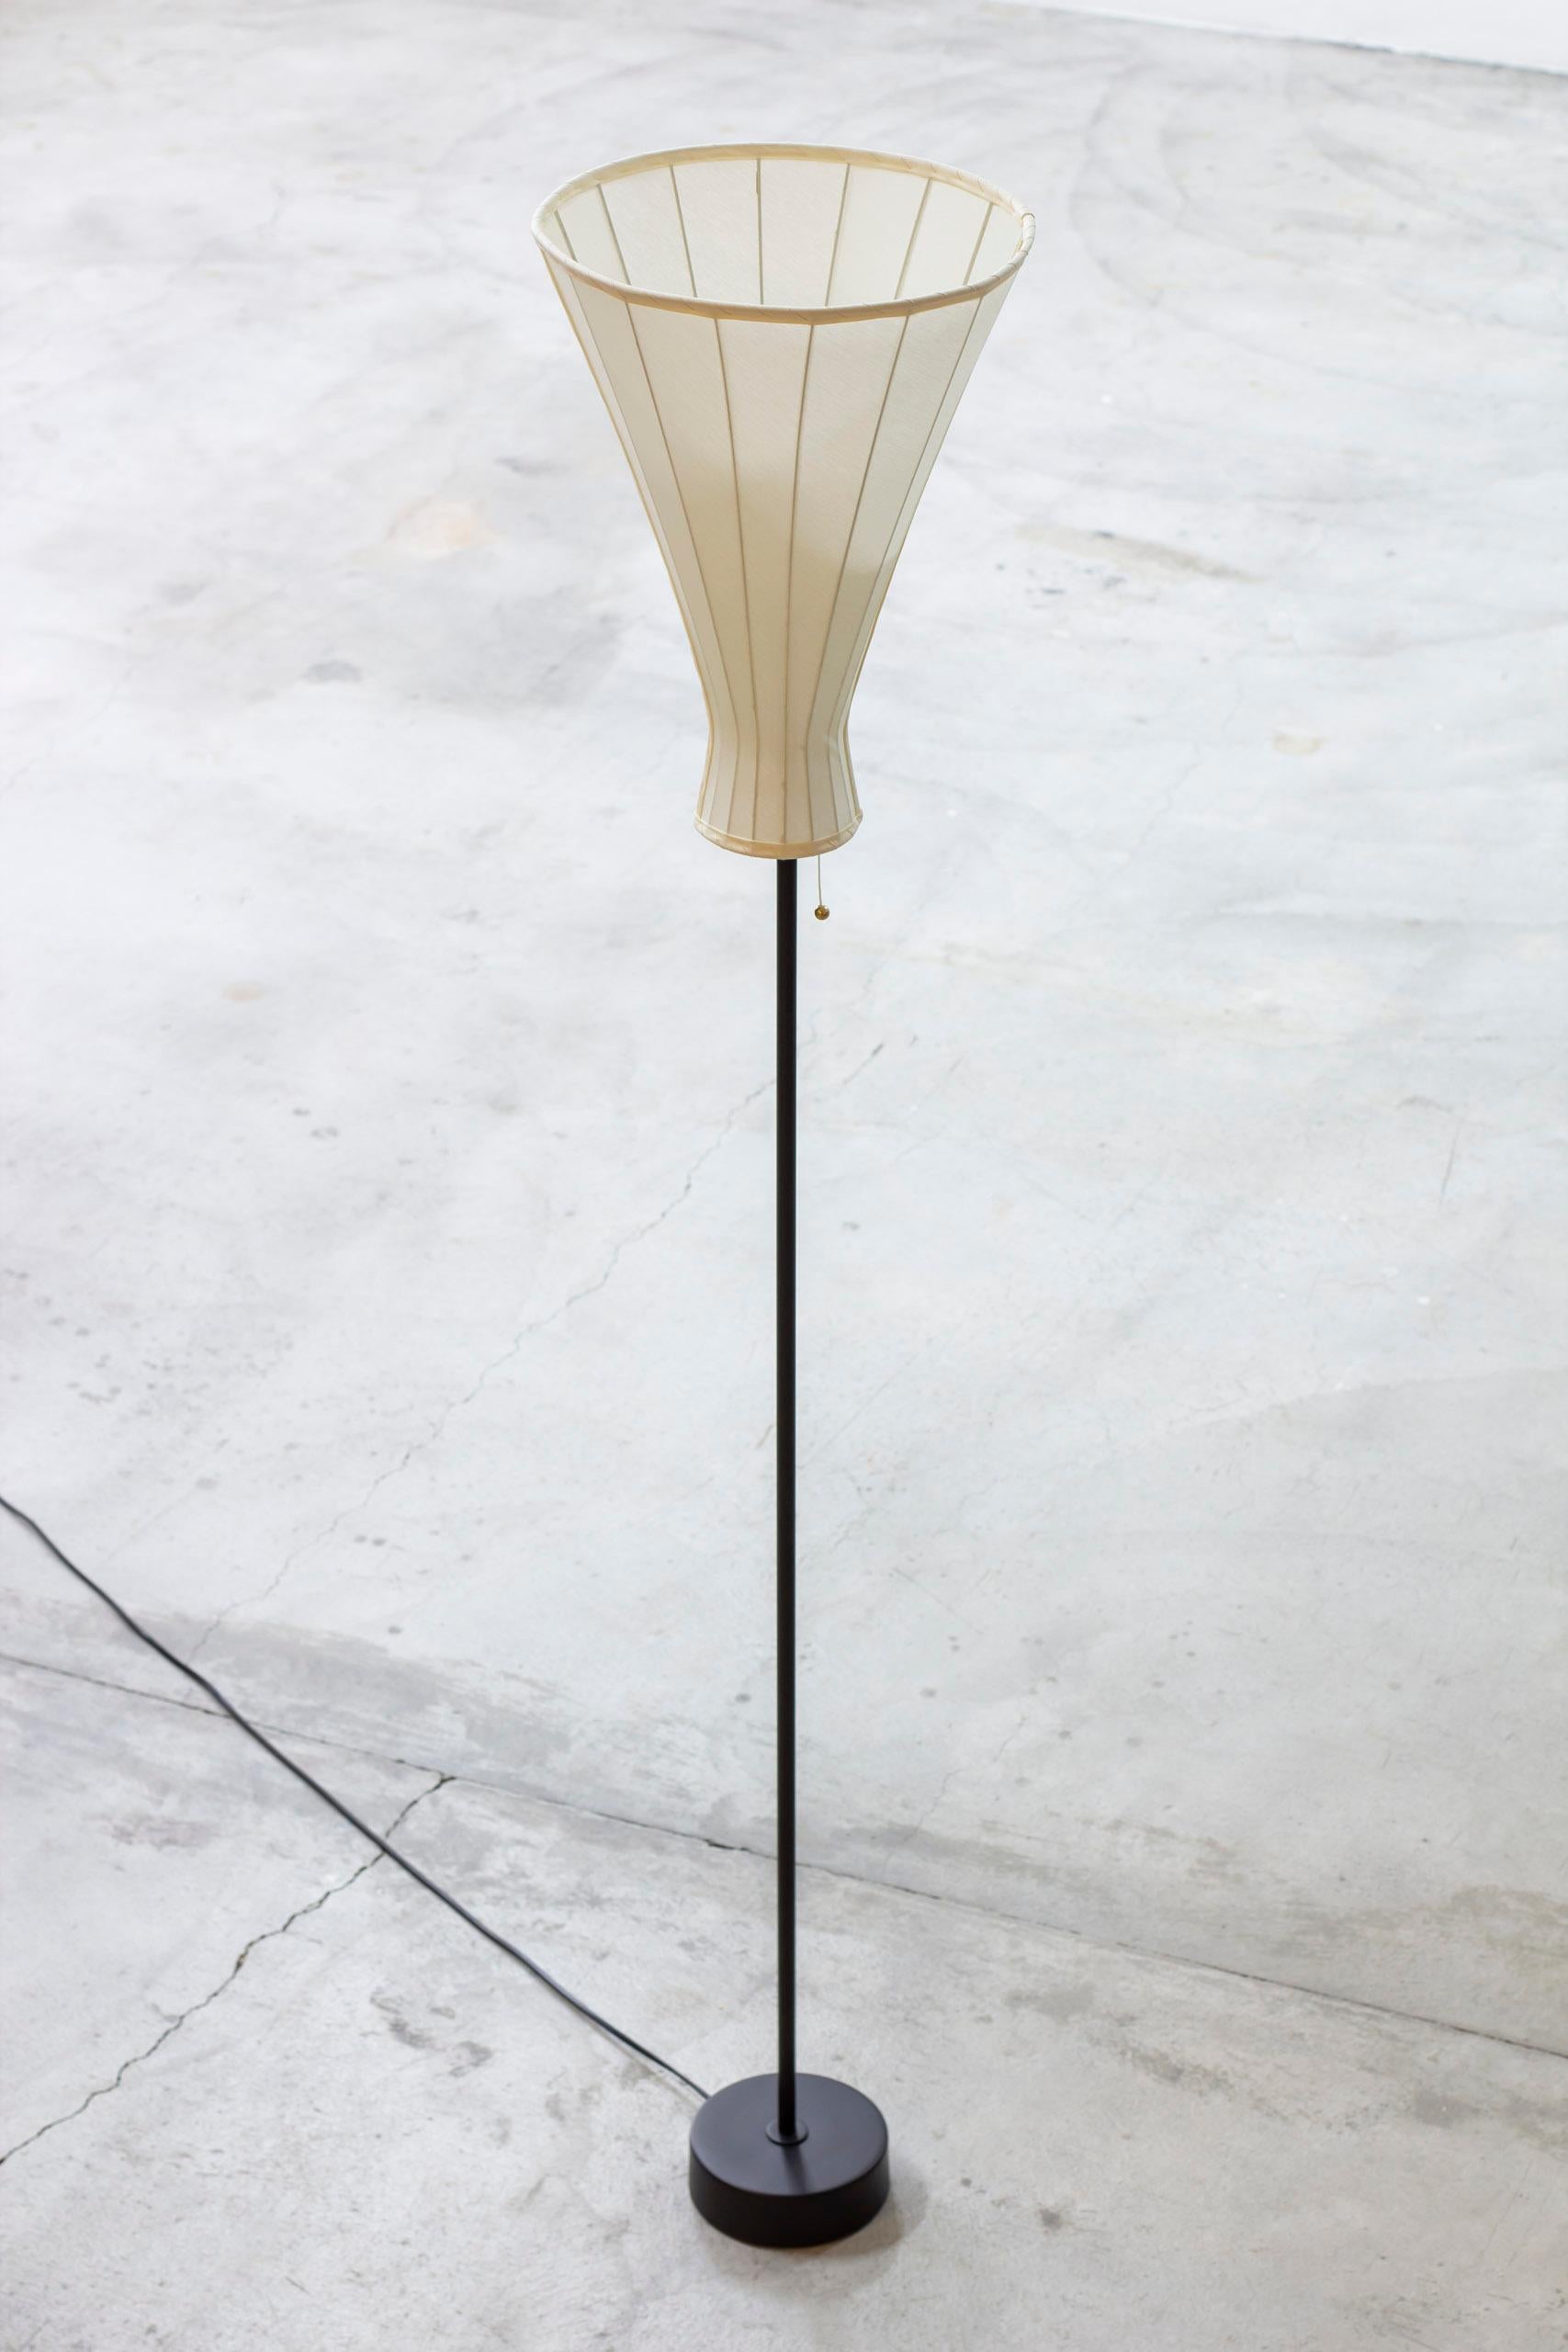 Floor lamp attributed to Hans Bergström. Produced by Ateljé Lyktan in Sweden during the 1950s. Made from black lacquered brass with brass details. Uplight shade has been reupholstered with new chintz fabric in a slight off white color. Chord light